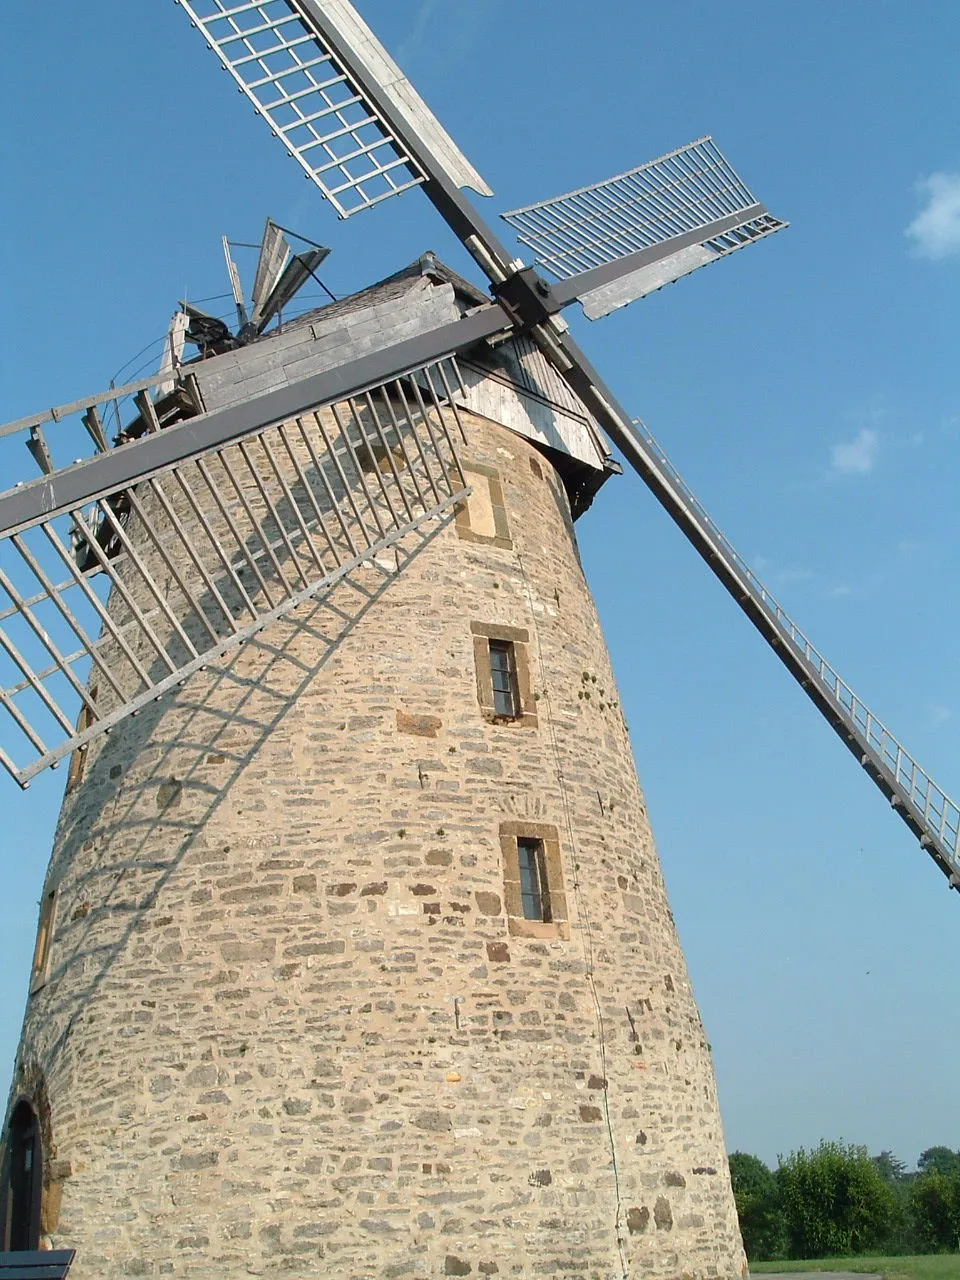 Photo showing: Windmill in town of Enger, District of Herford, North Rhine-Westphalia, Germany.